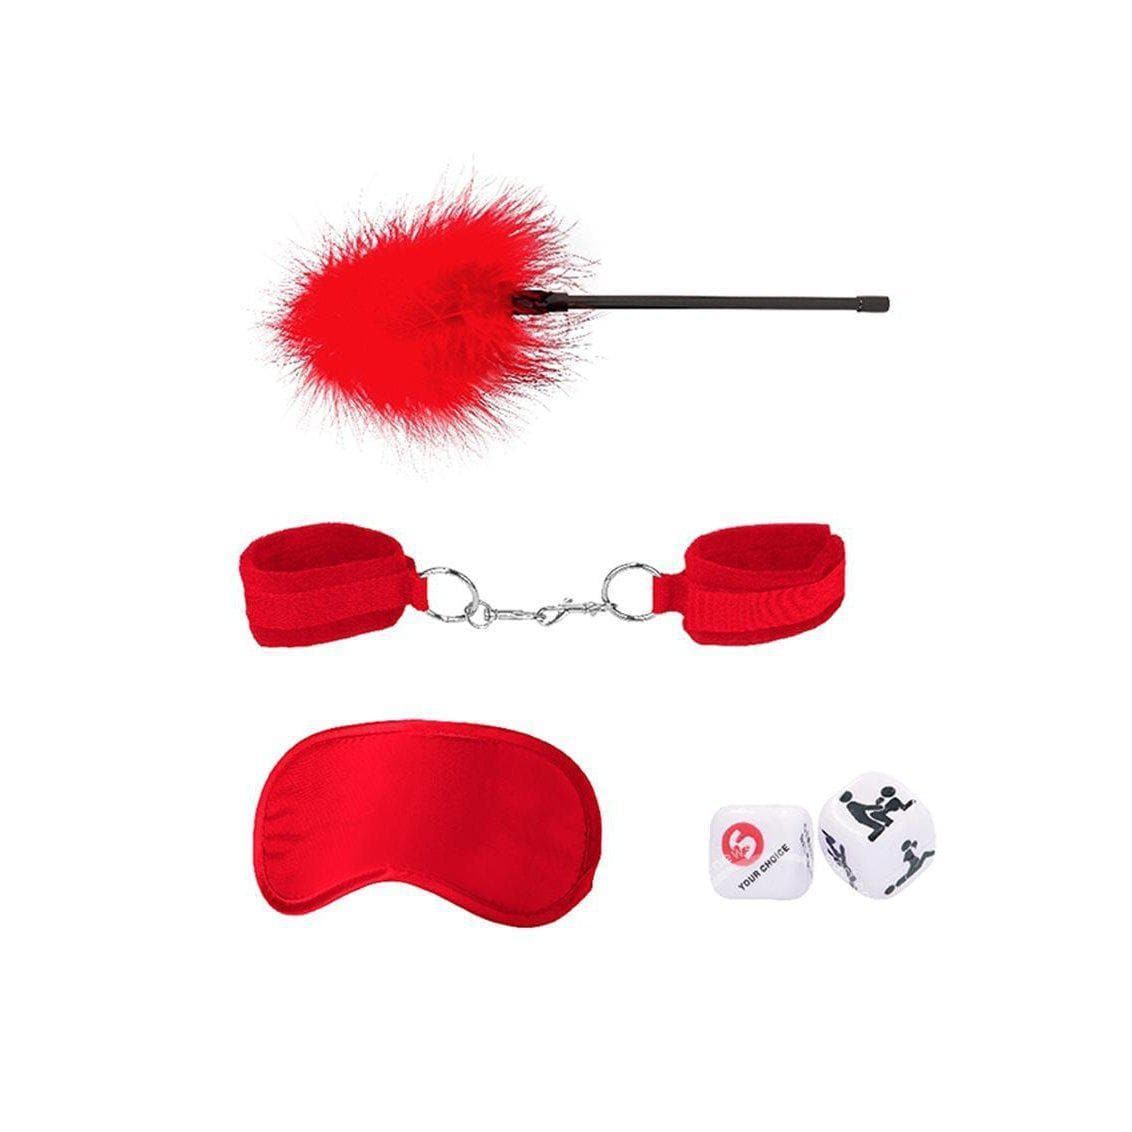 Shots Ouch! Kits Introductory 4 Piece Bondage Kit #2 Red - Romantic Blessings